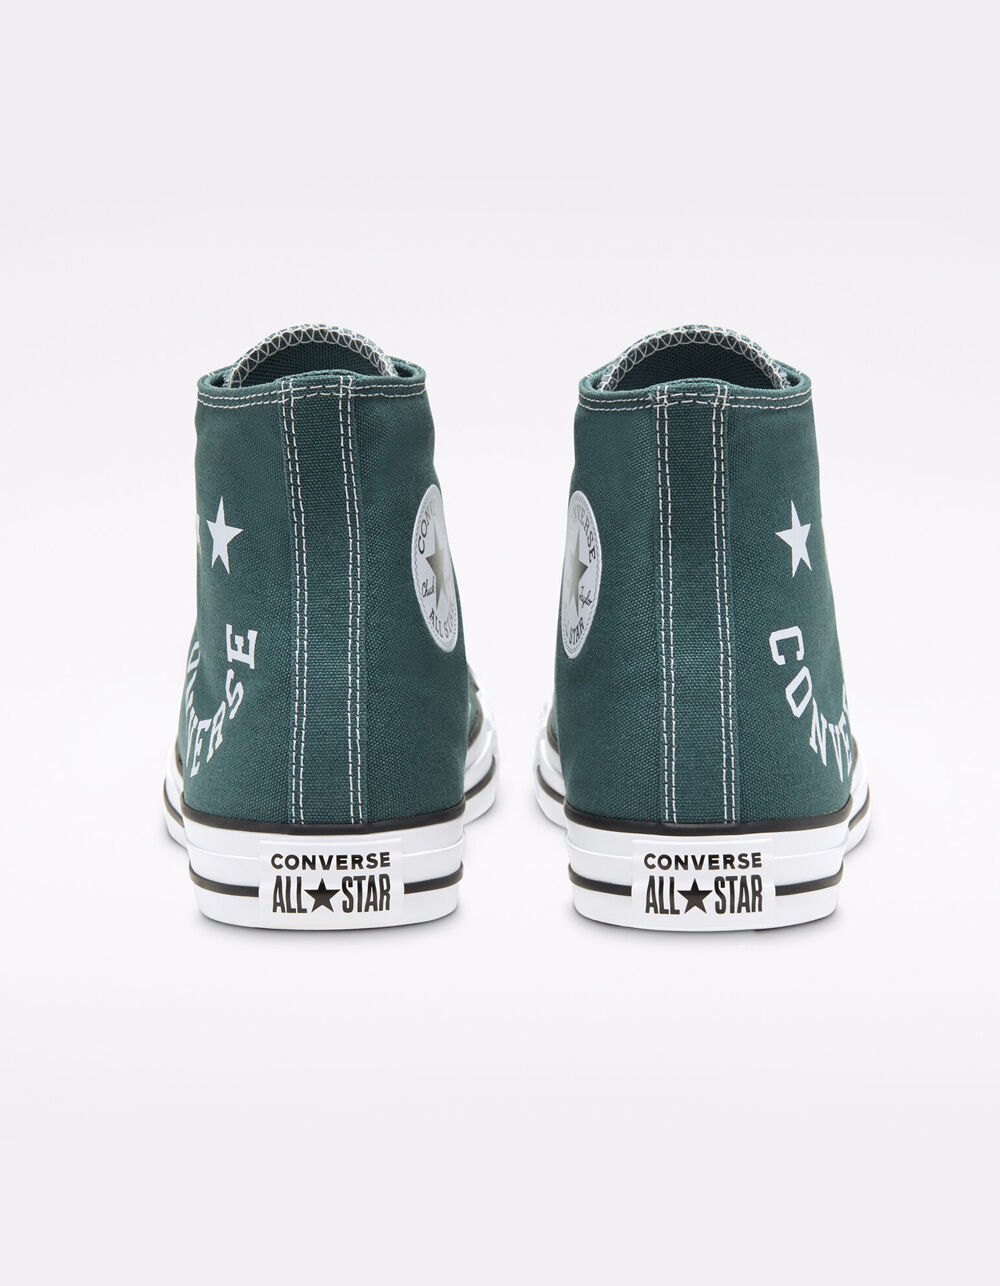 CONVERSE Cheerful Chuck Taylor All Star Spruce High Top Shoes - SPRUCE ...